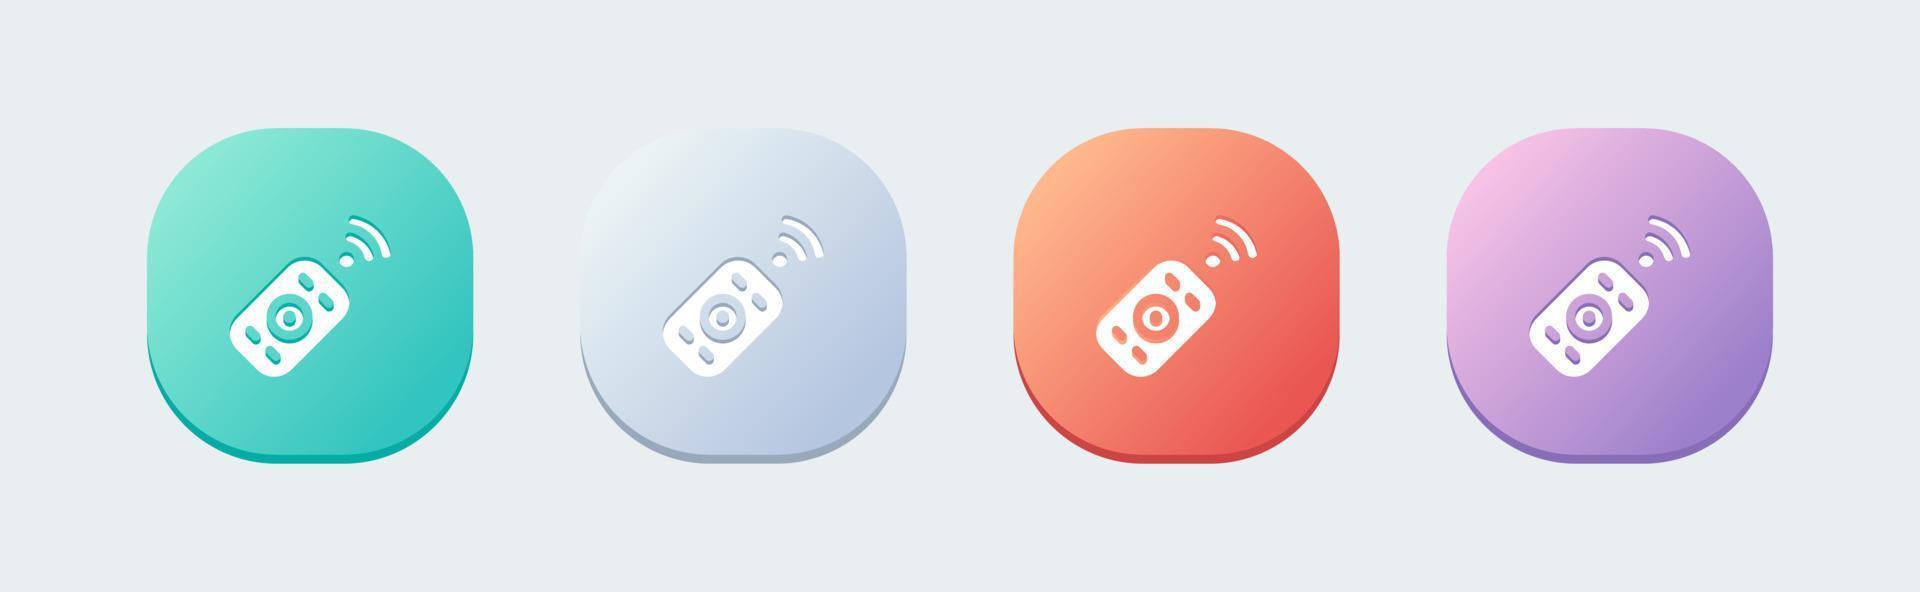 Remote solid icon in flat design style. Wireless control signs vector illustration